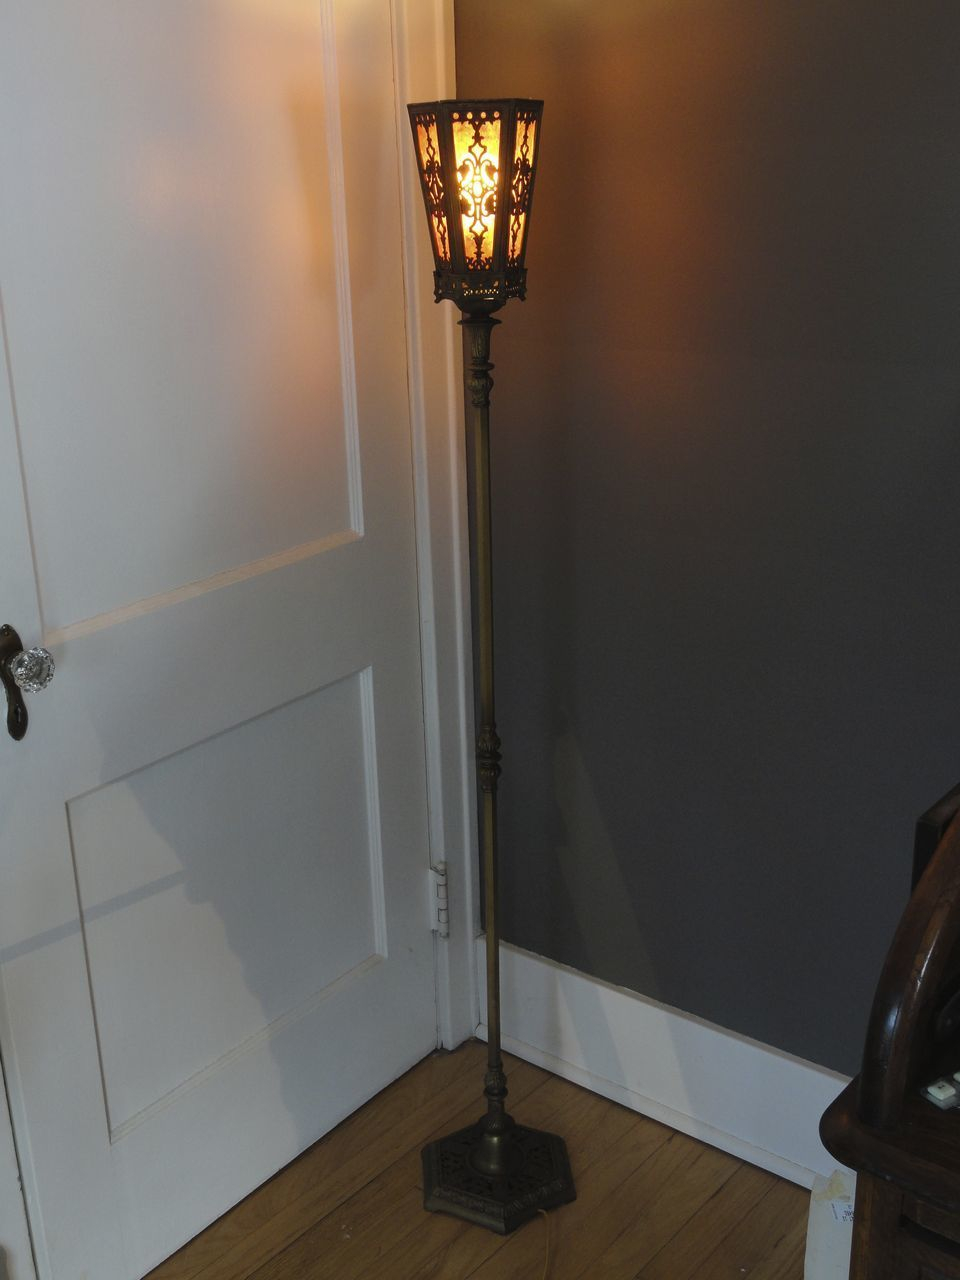 Classy Gothic Torchere Fireplace Floor Lamp W Mica Shade regarding proportions 960 X 1280